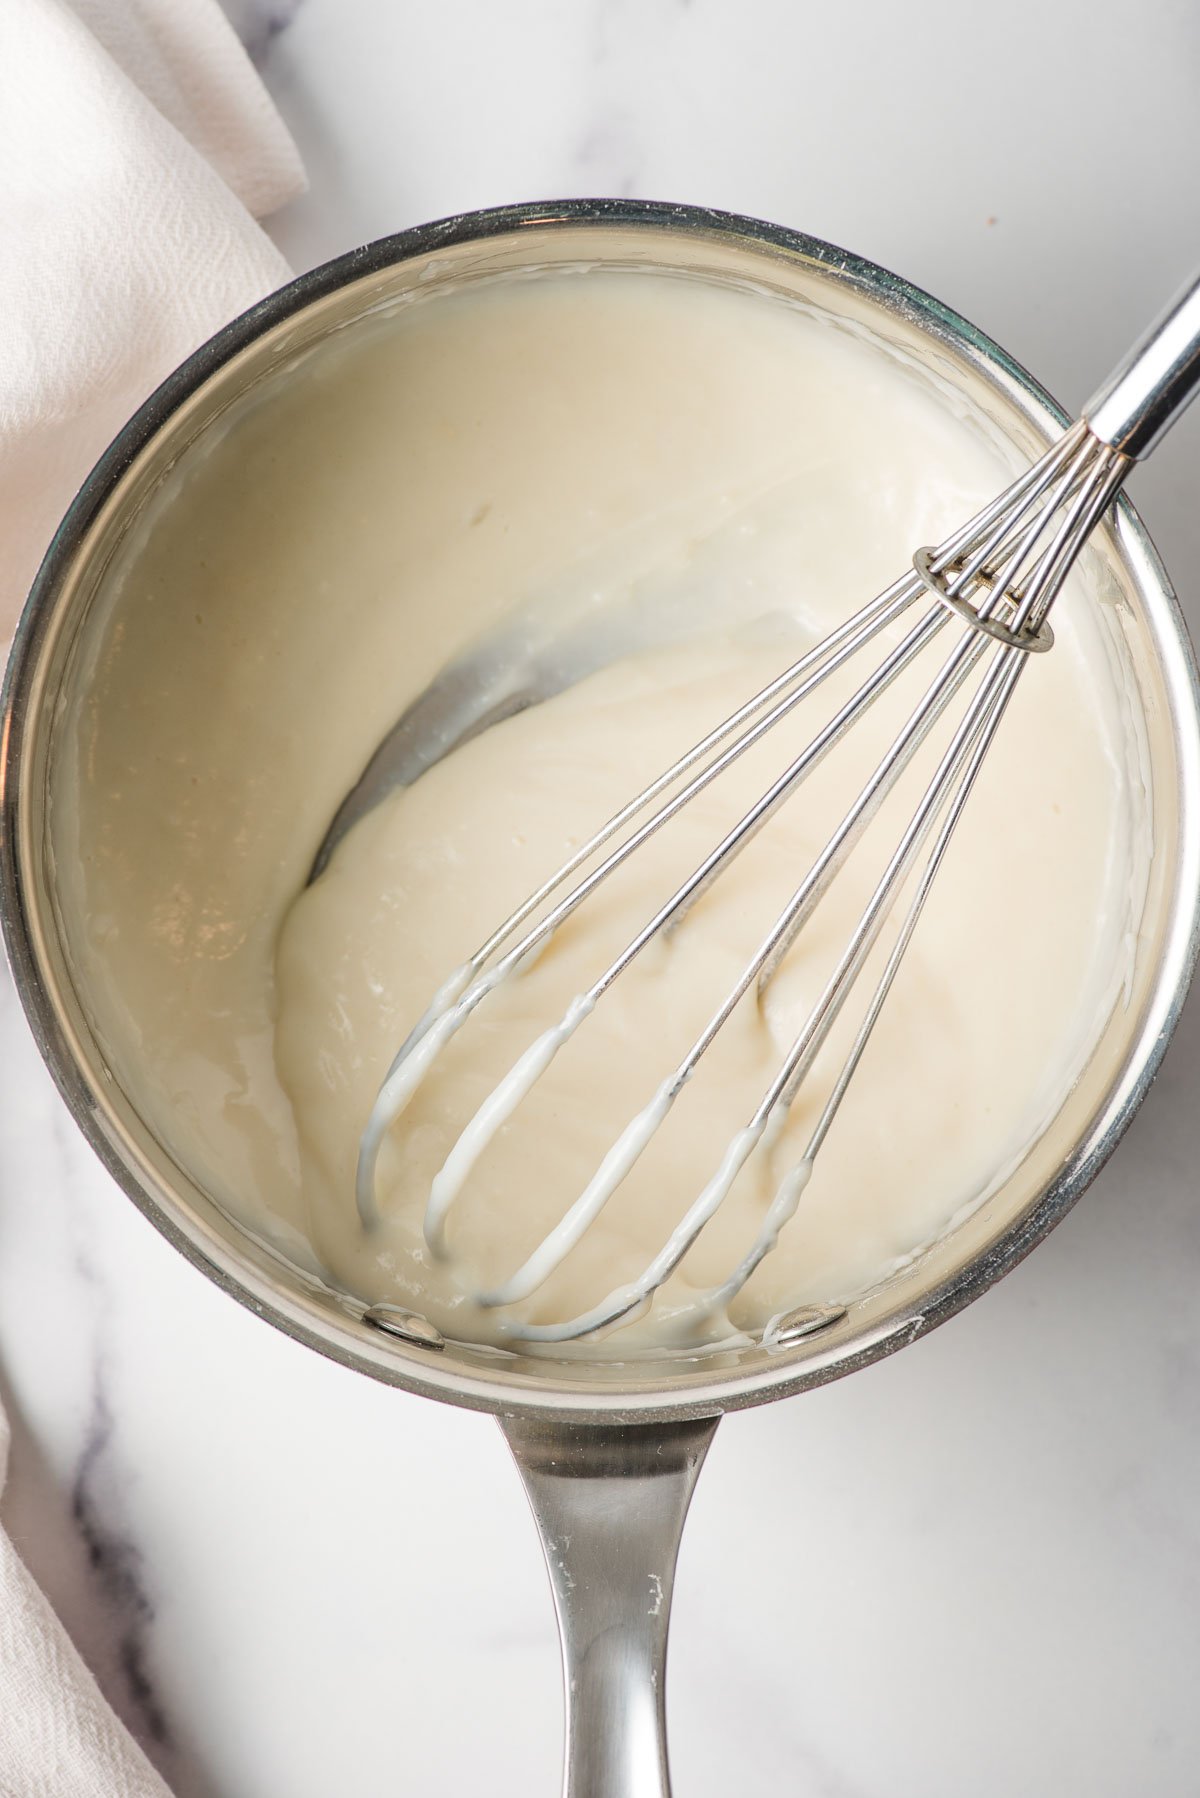 Whisk mixing together cooked flour and milk in a sauce pan.